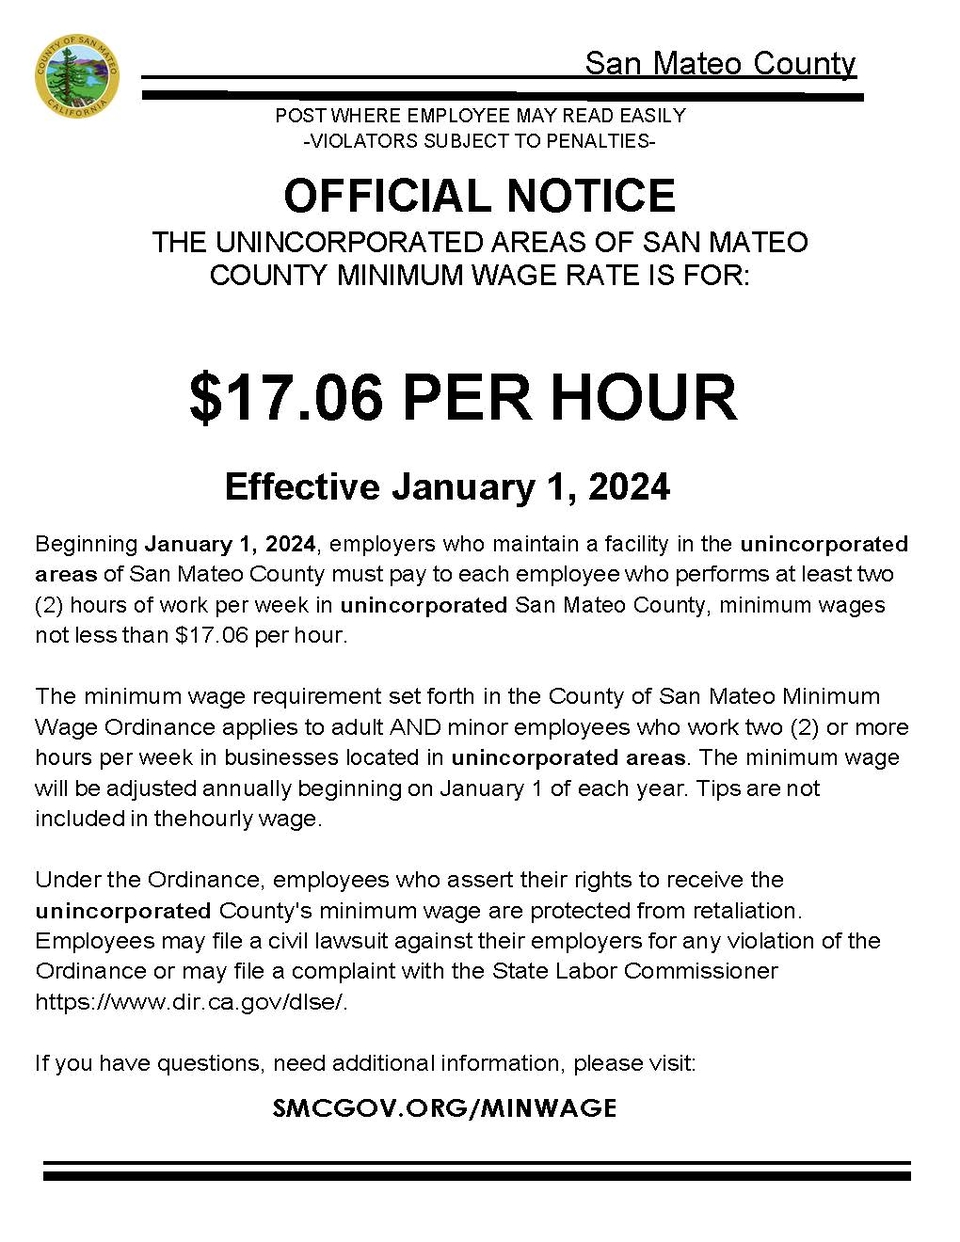 Minimum Wage Rises to 17.06 an Hour Beginning New Years Day in